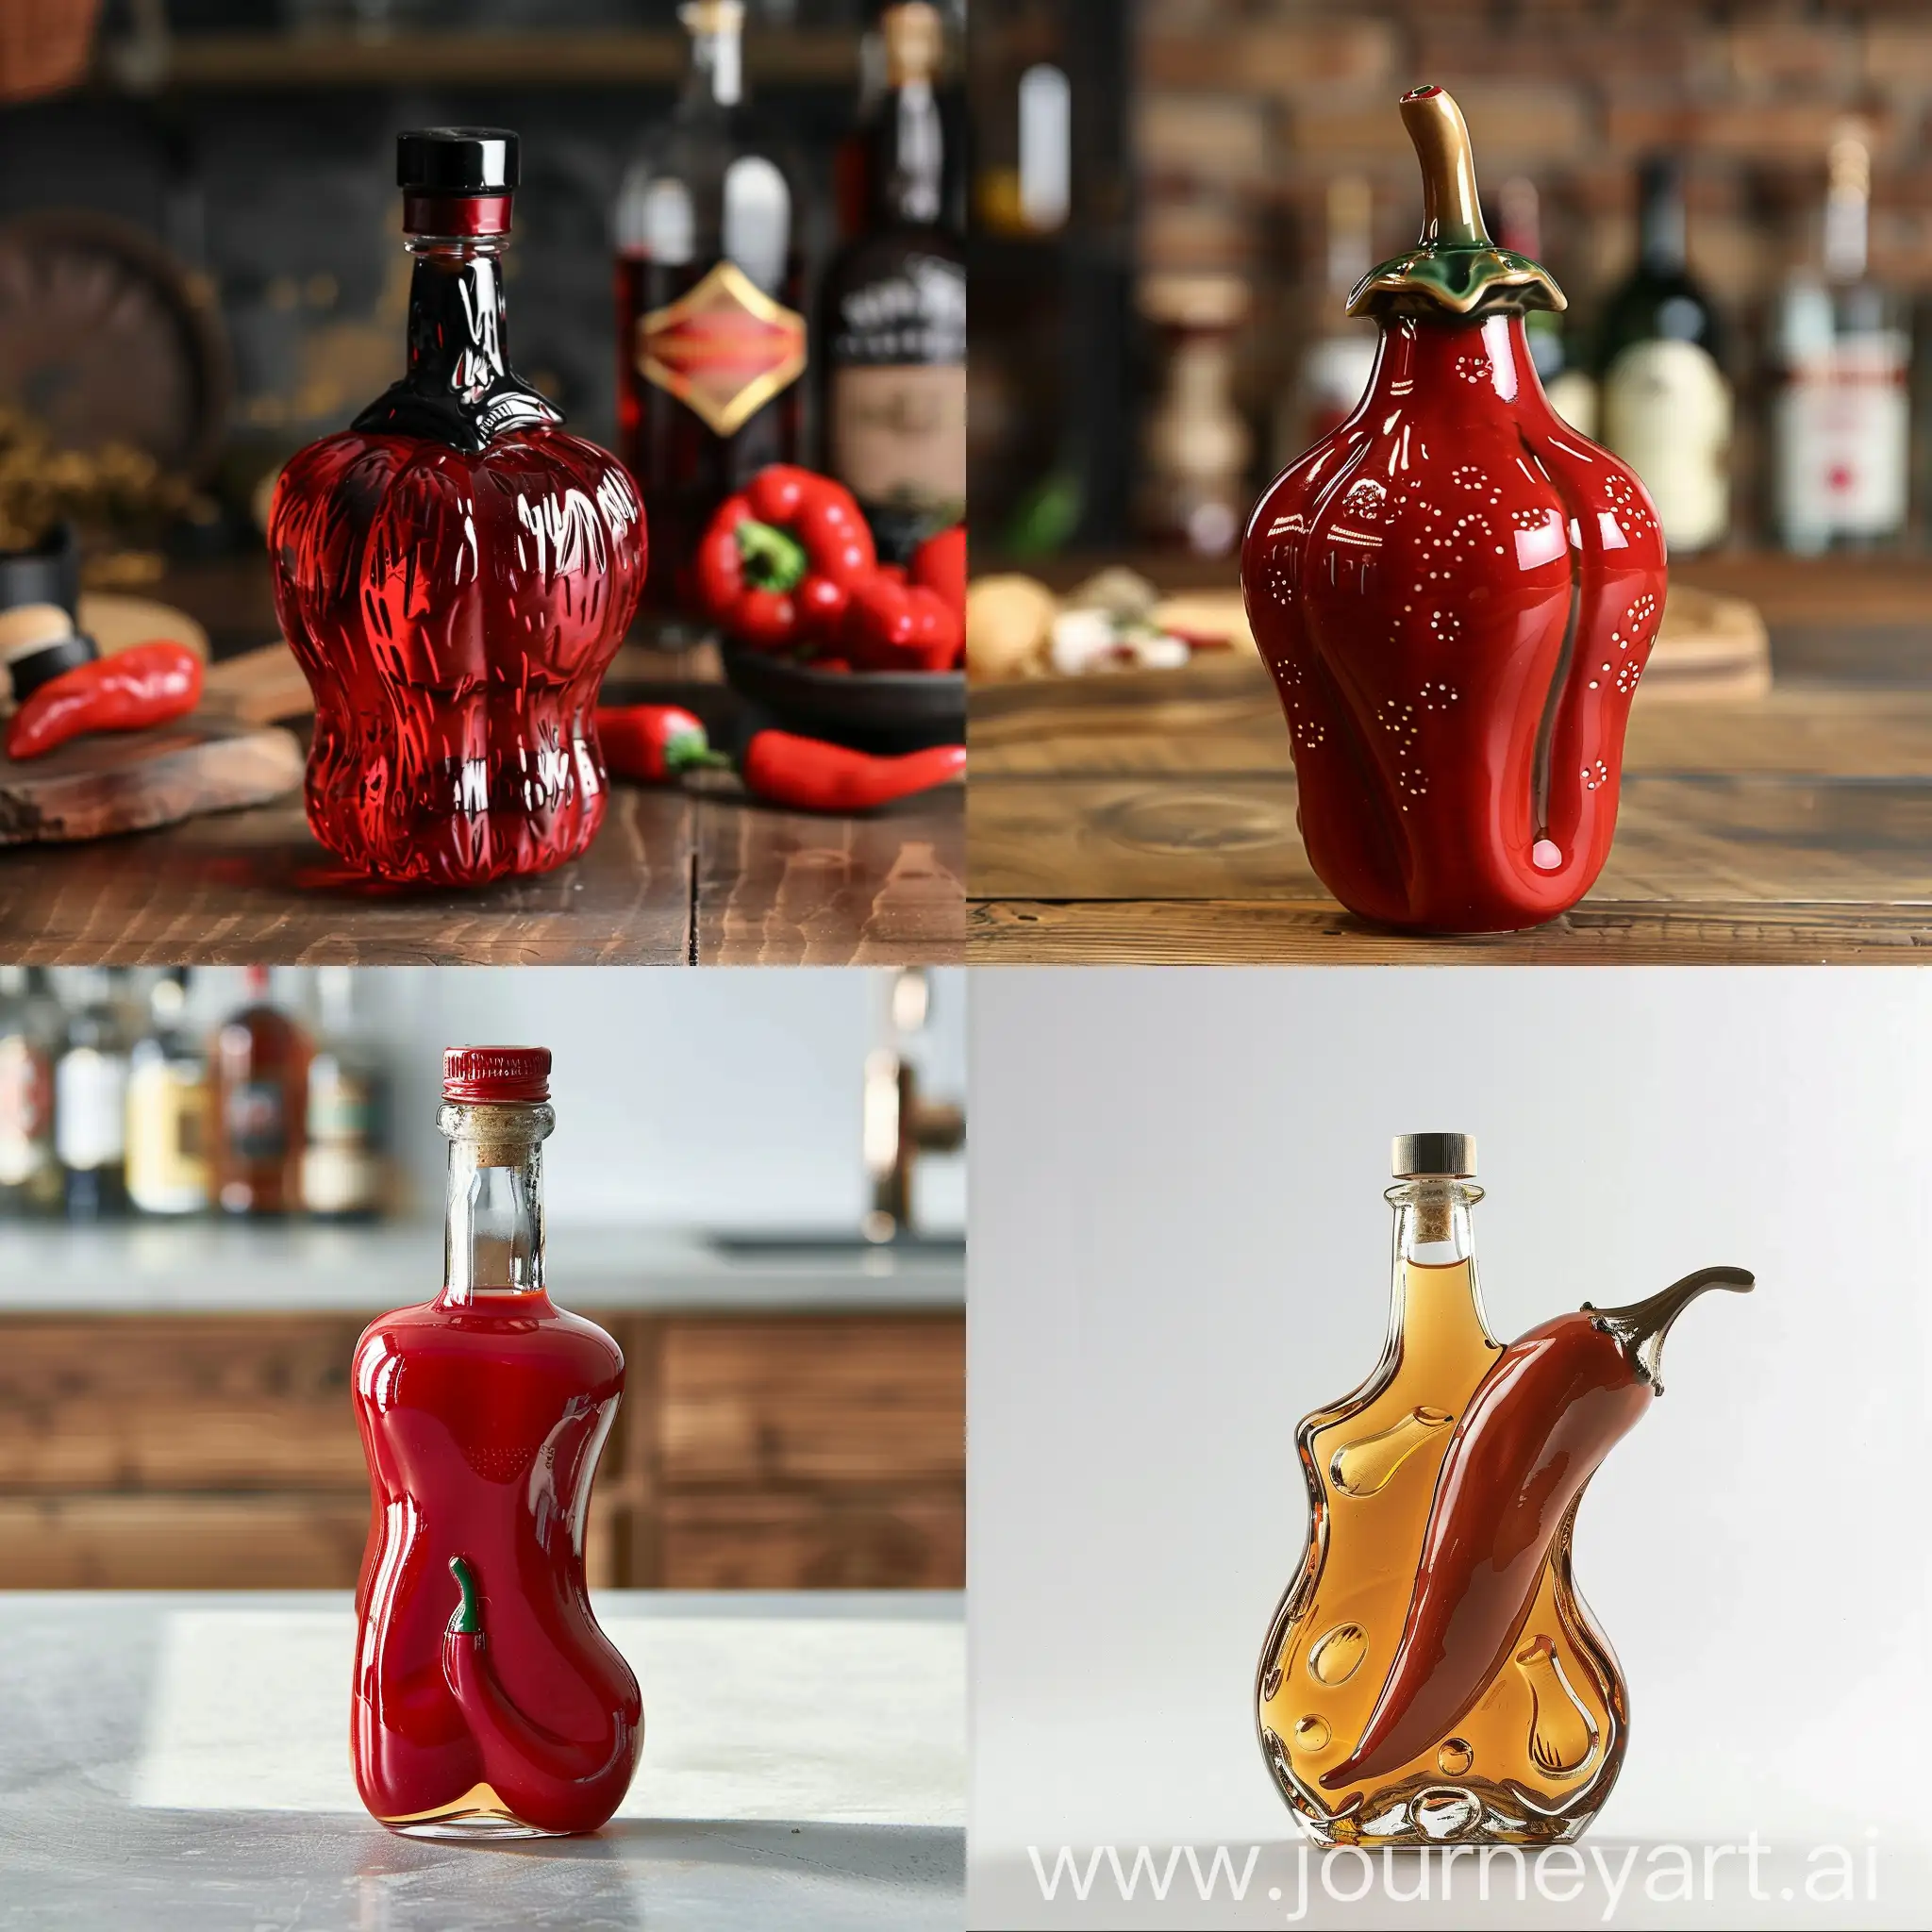 Colorful-PepperShaped-Alcohol-Bottle-on-Vibrant-Background